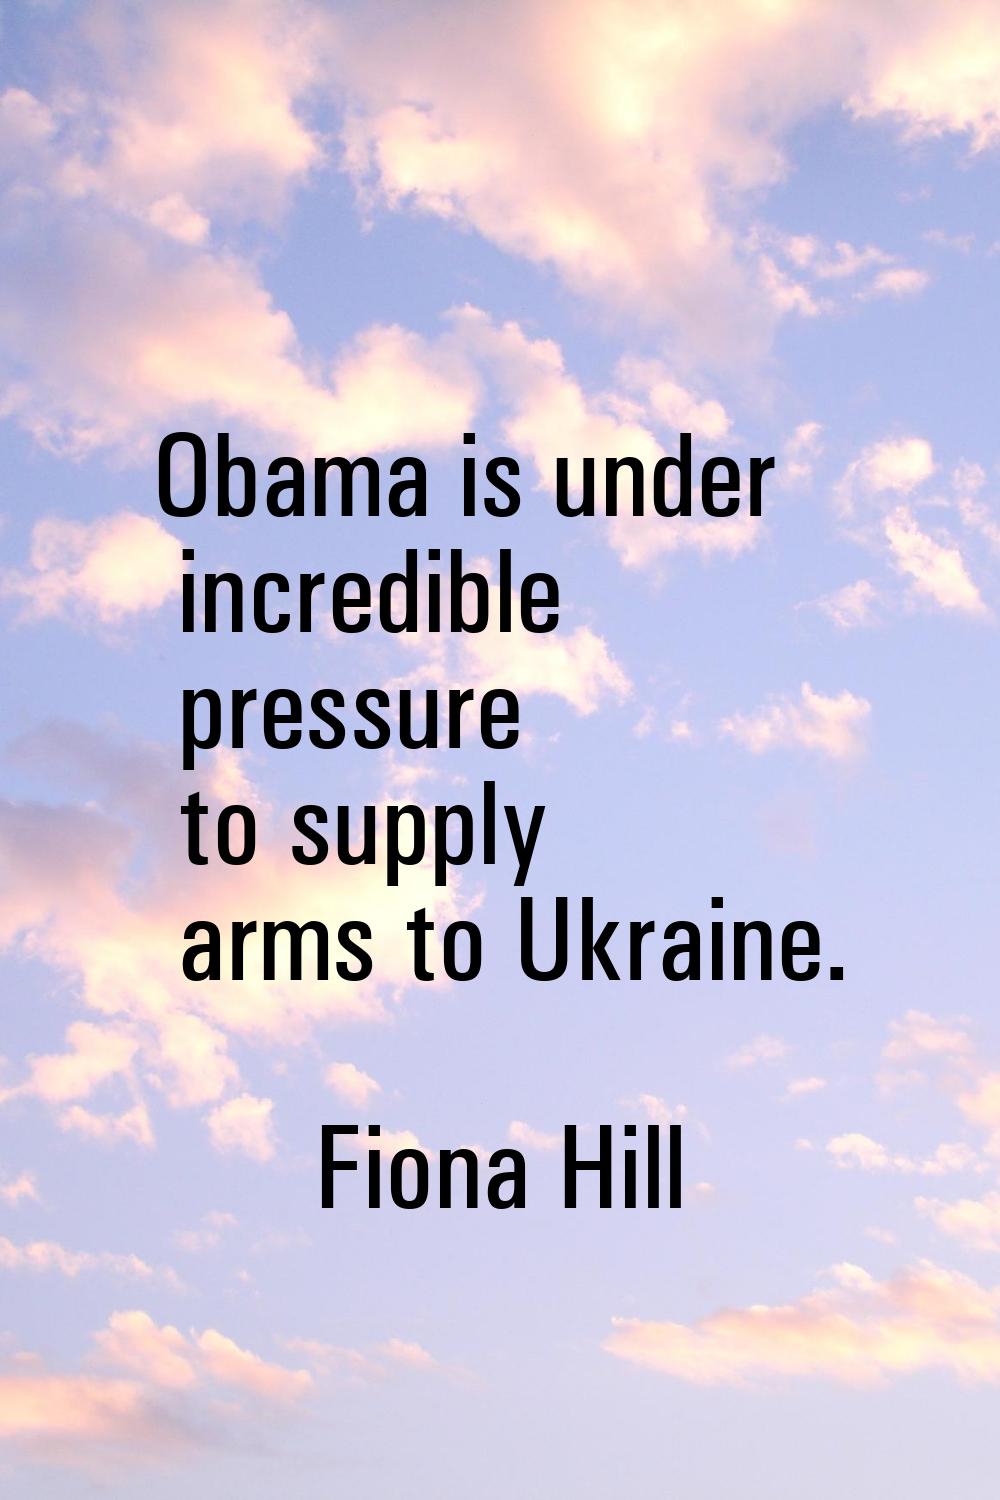 Obama is under incredible pressure to supply arms to Ukraine.